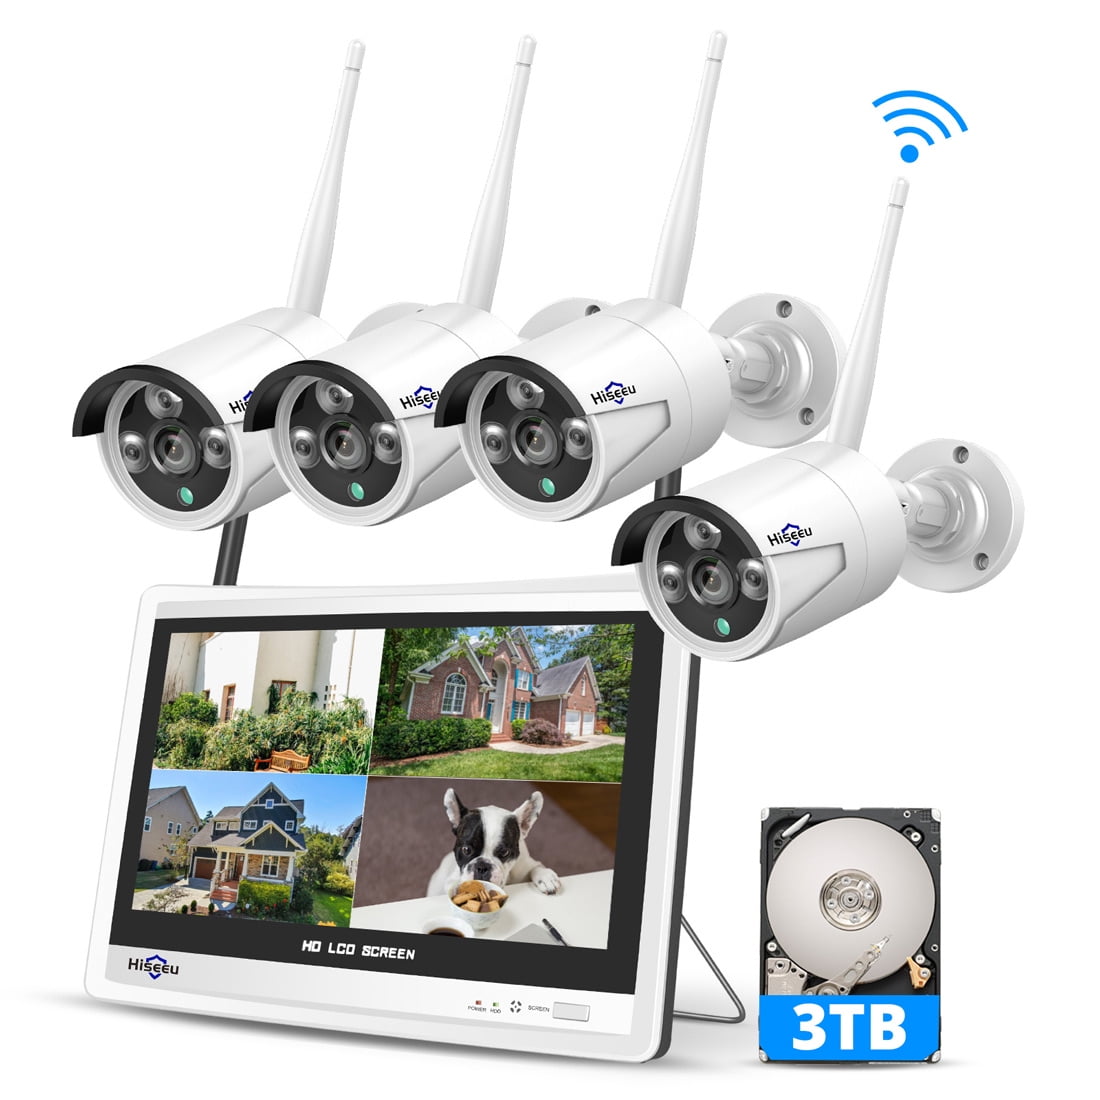 Dierentuin s nachts Herdenkings Arbeid Hiseeu 3MP Security Camera System with 12.1" Monitor, 3TB Hard Drive, 4Pcs  Security Cameras Wireless Wifi for Recording and Remote View, Home Security  Camera System - Walmart.com